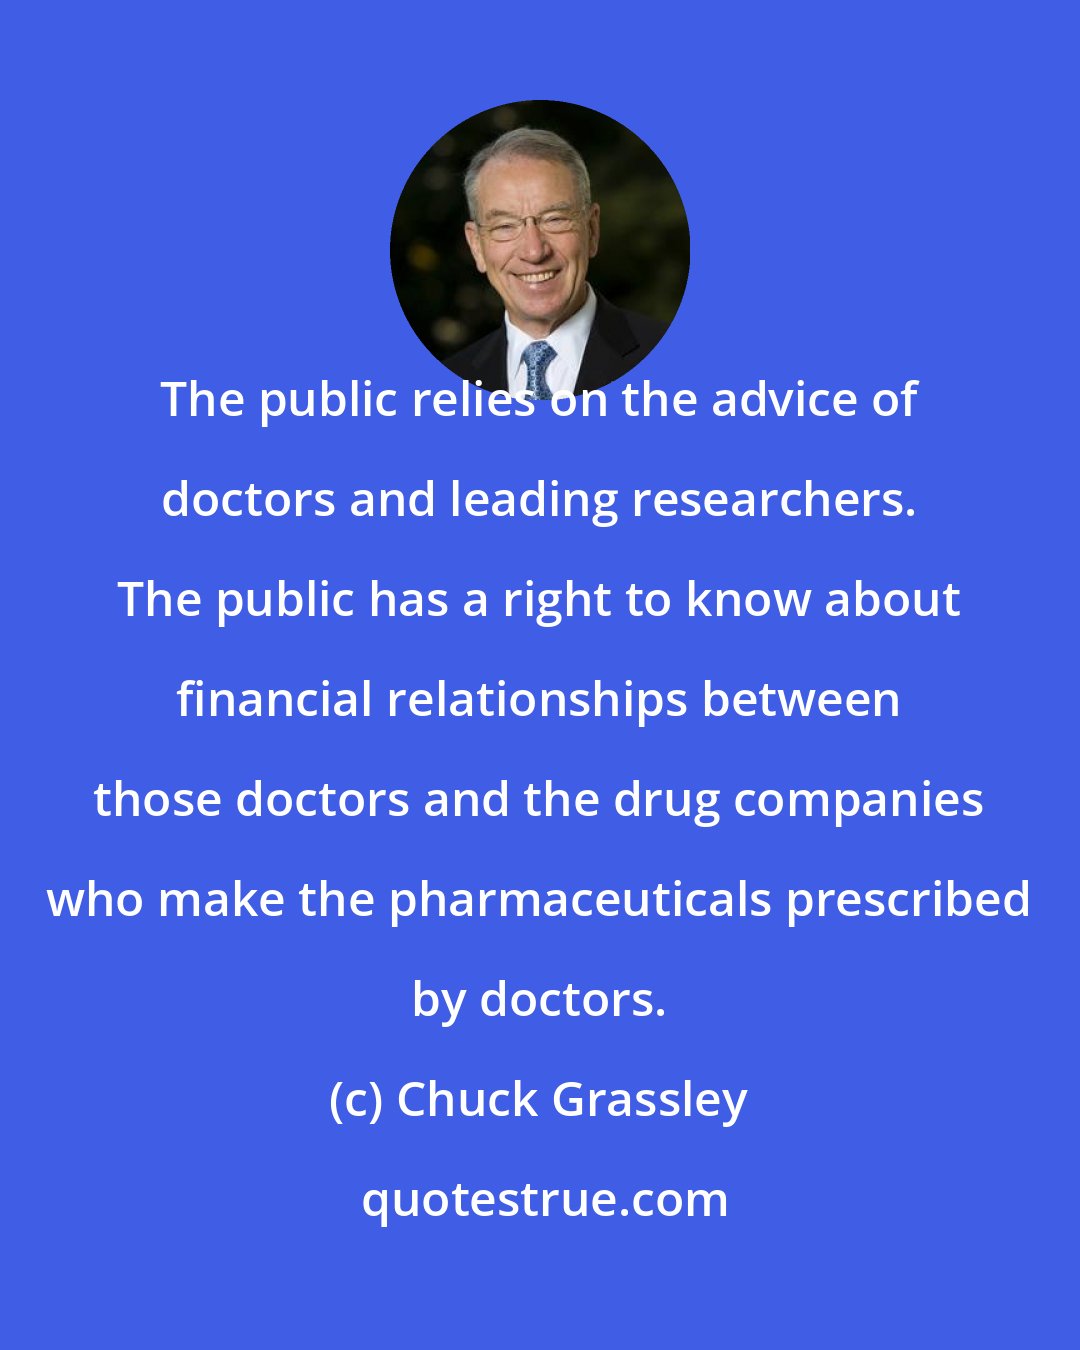 Chuck Grassley: The public relies on the advice of doctors and leading researchers. The public has a right to know about financial relationships between those doctors and the drug companies who make the pharmaceuticals prescribed by doctors.